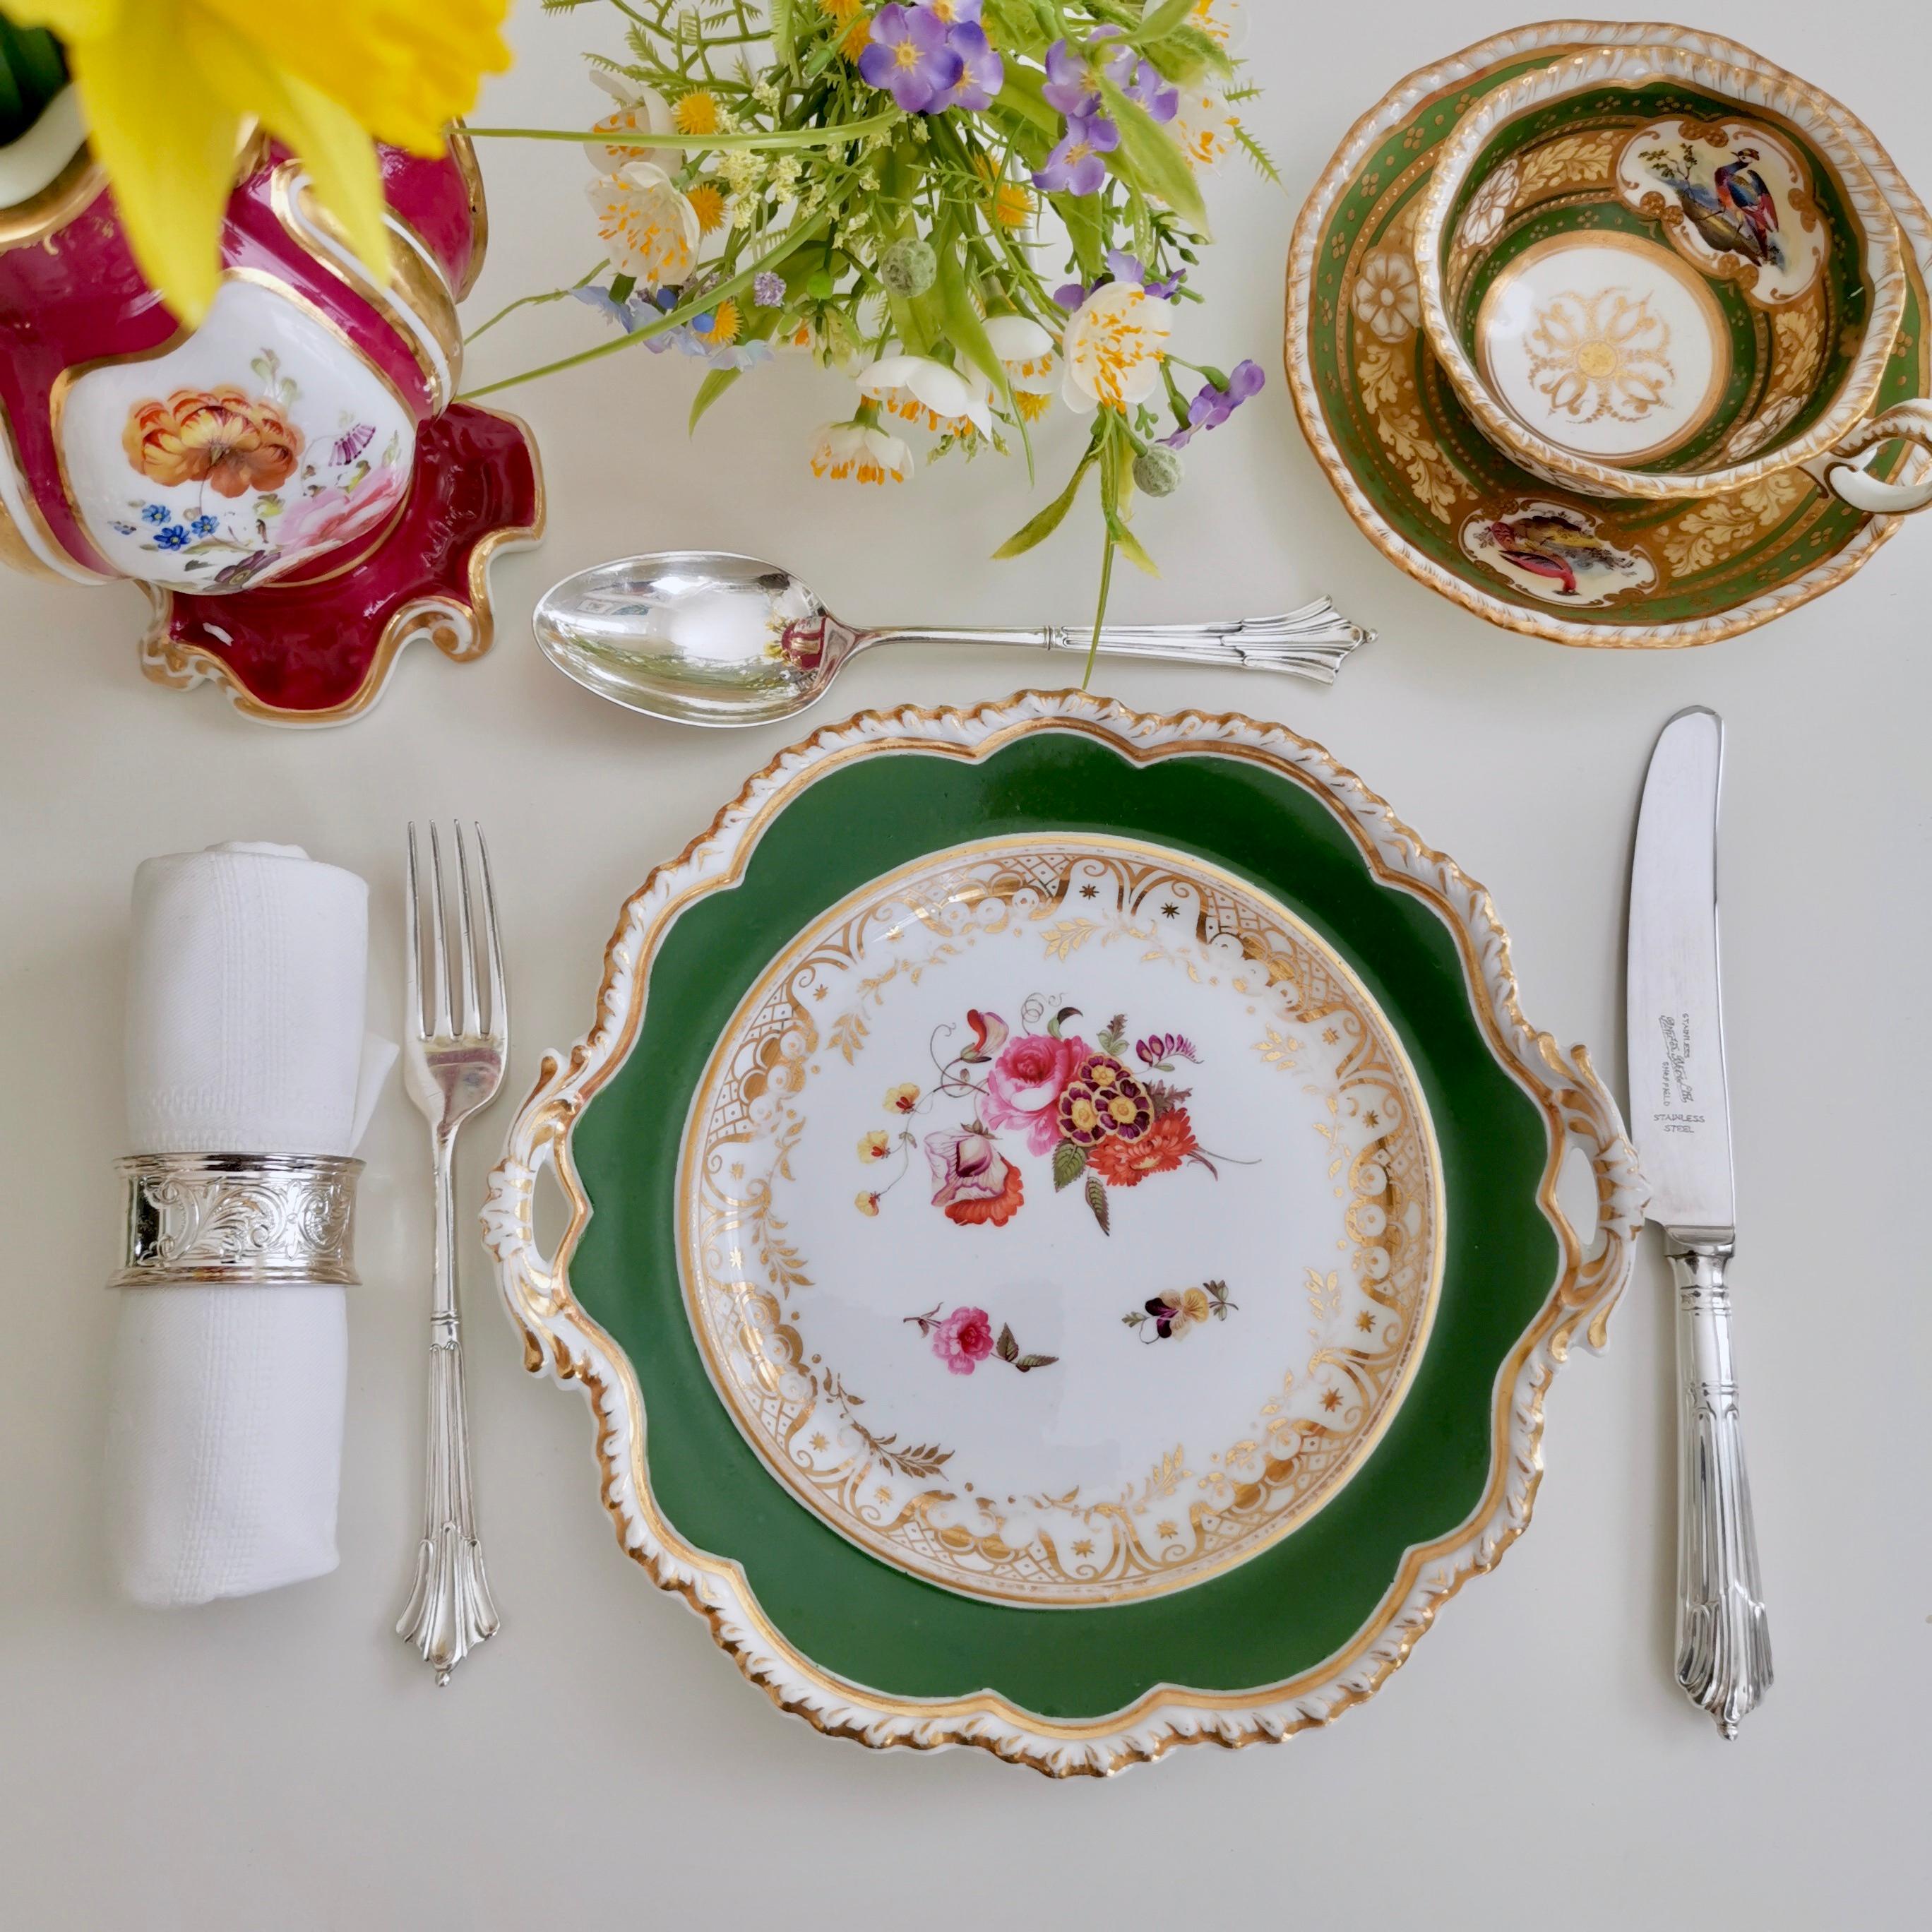 This is a very beautiful dessert plate made by Ridgway around 1825, which is known as the Regency period. The plate has a deep green ground and hand painted flowers, and would have formed part of a large dessert service.

Ridgway was one of the